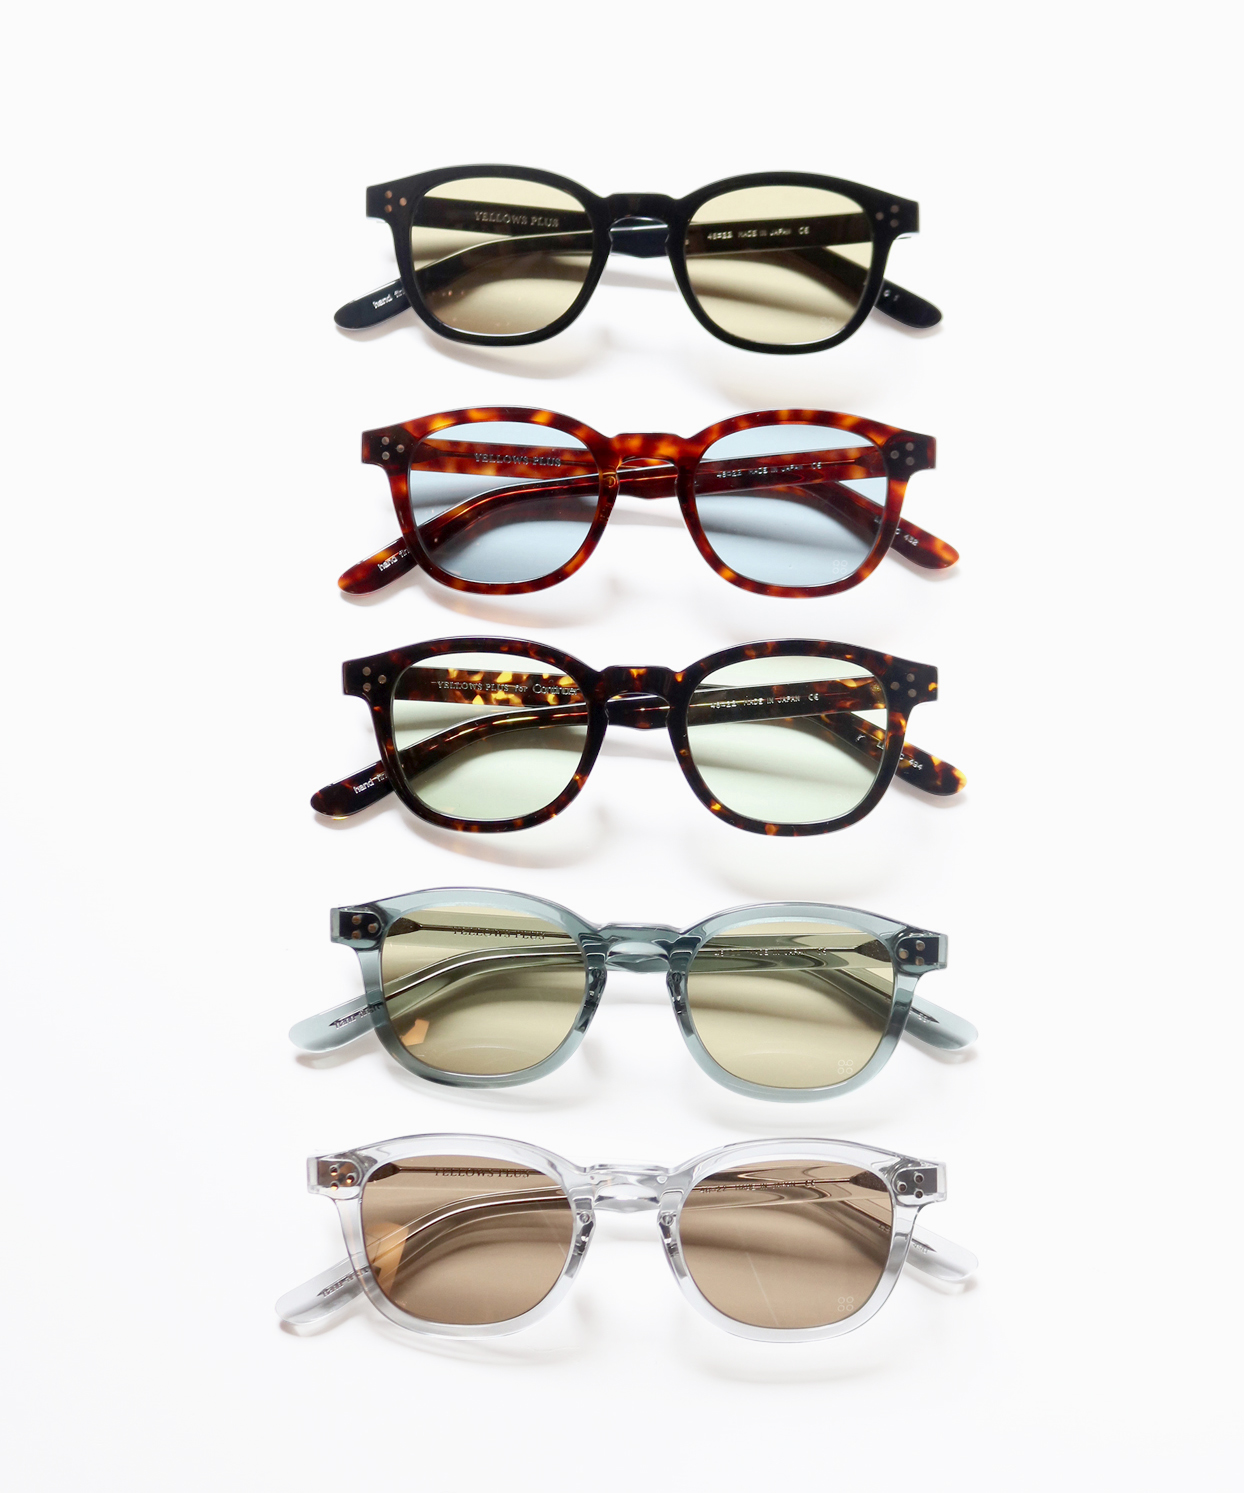 YELLOWS PLUS｜＊SUNGLASSES COLLECTION - 2022 SPRING & SUMMER｜LEON